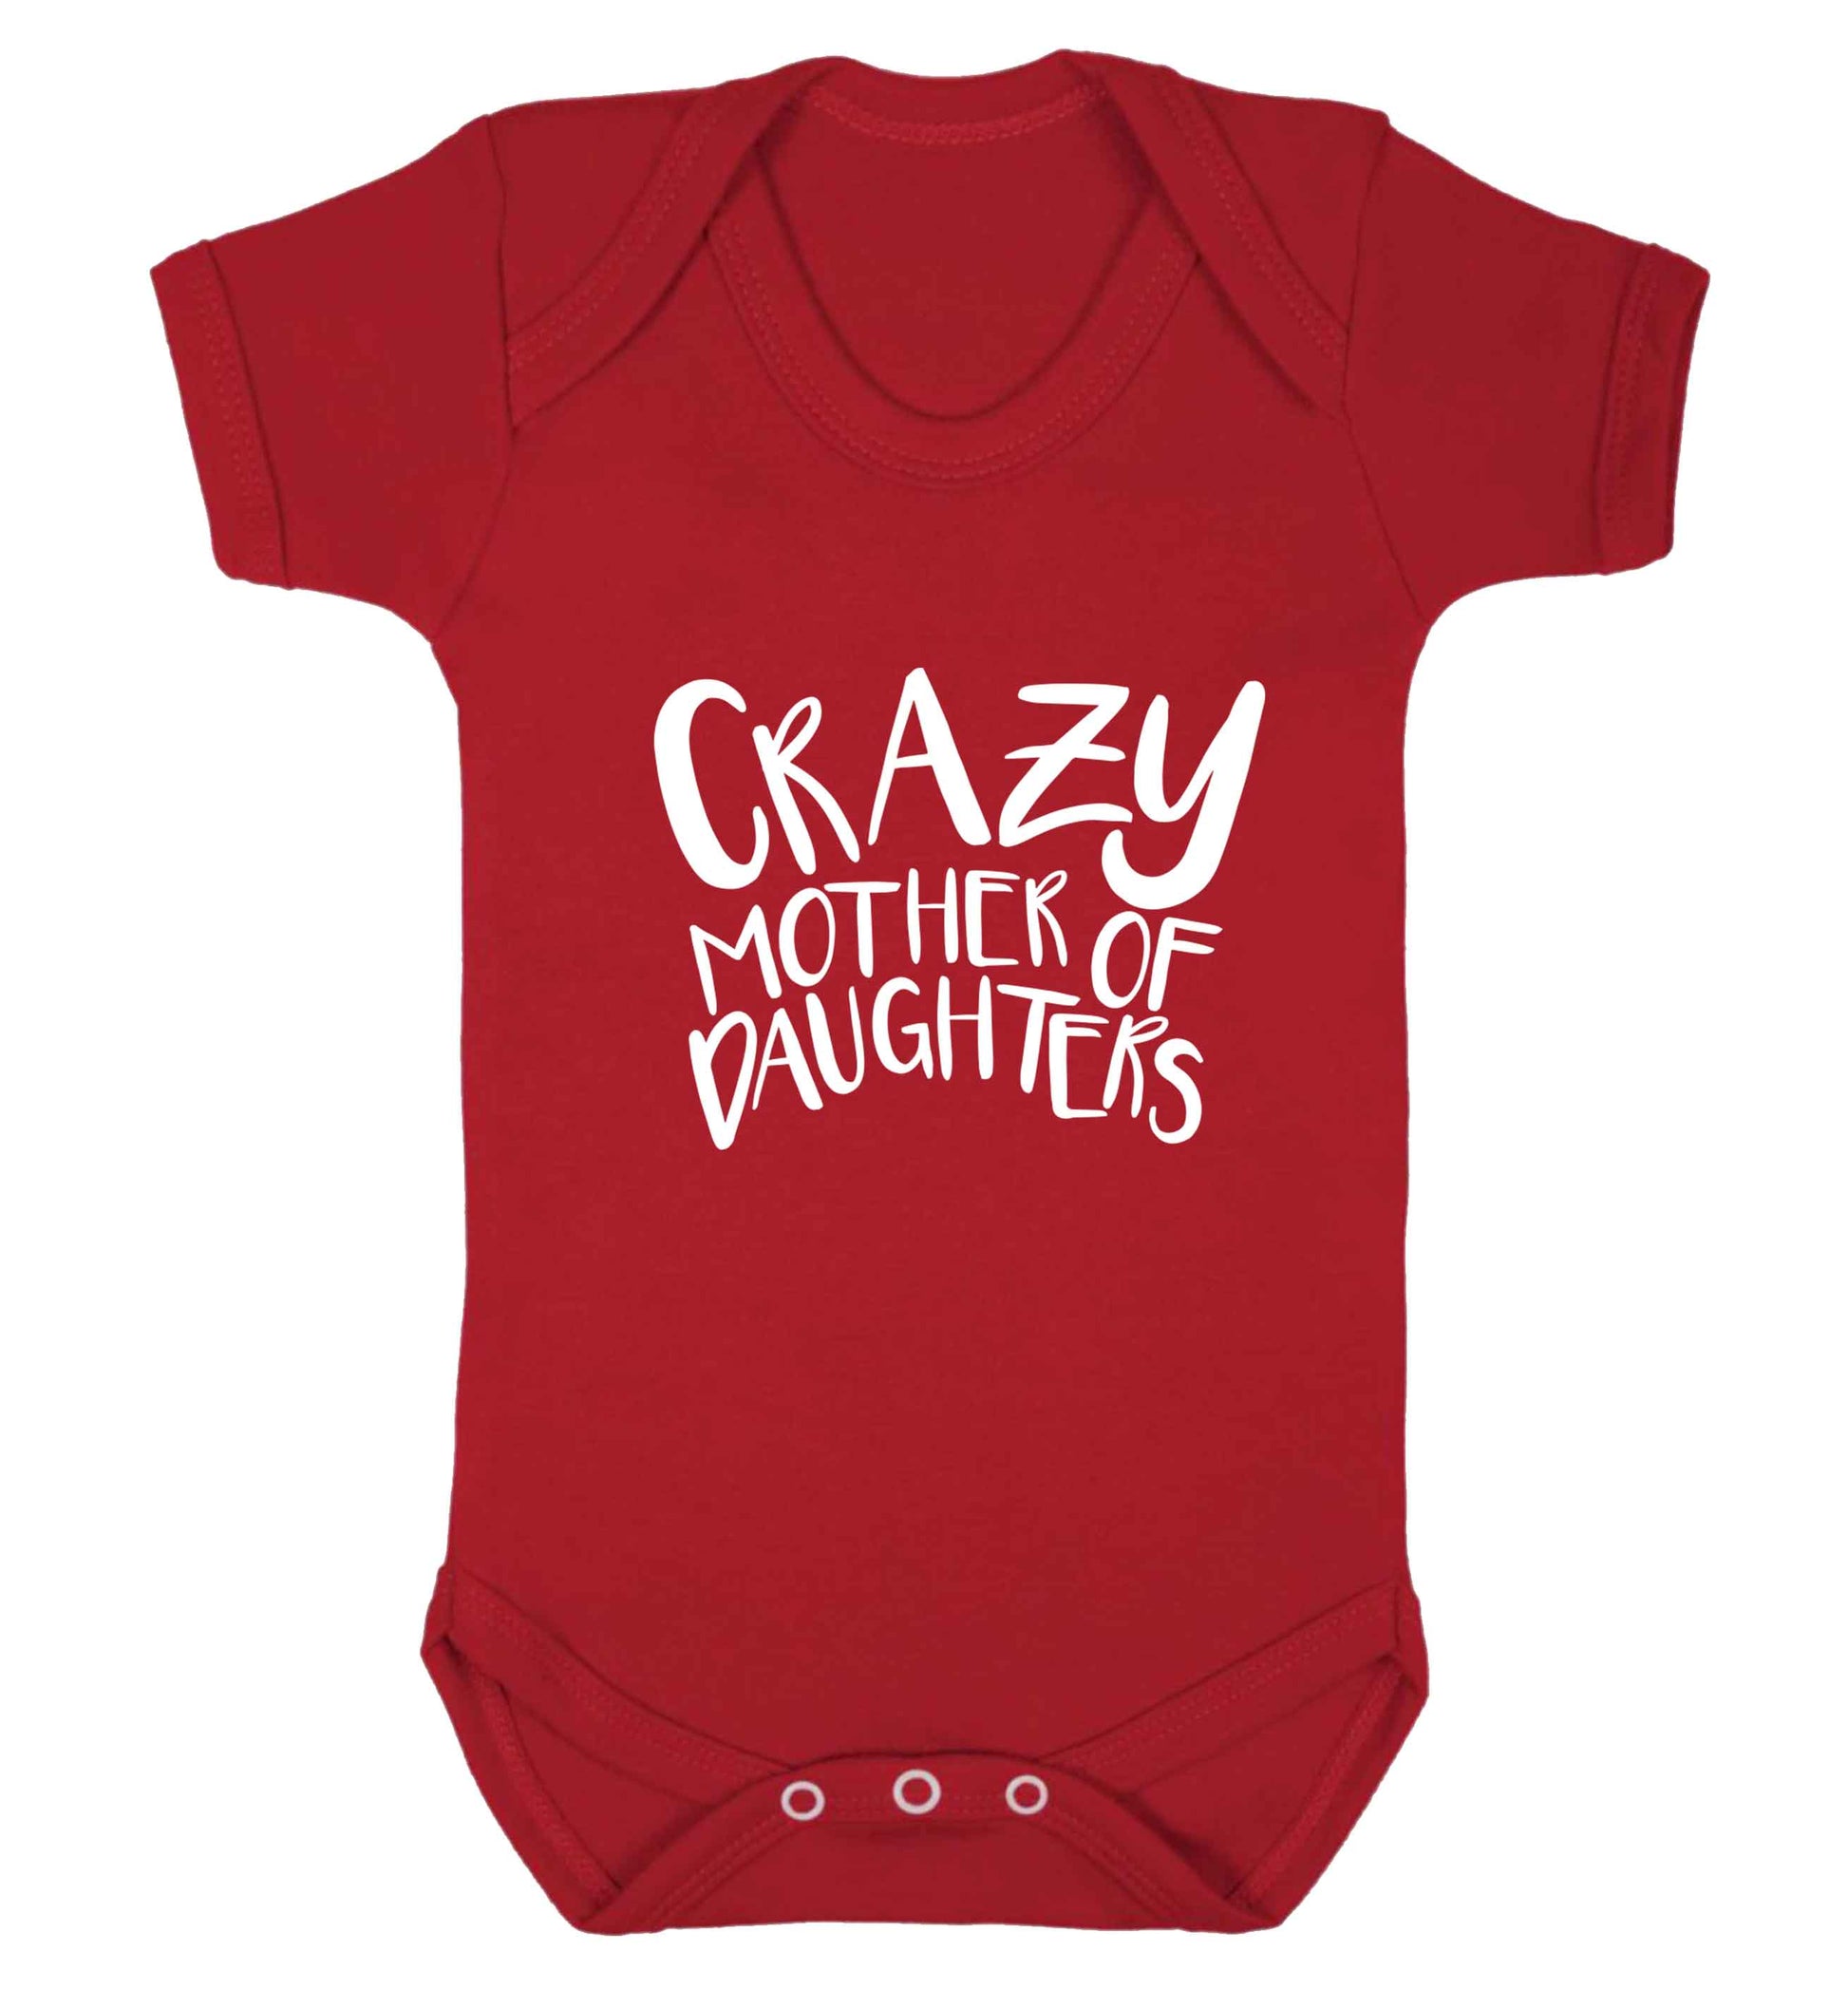 Crazy mother of daughters baby vest red 18-24 months